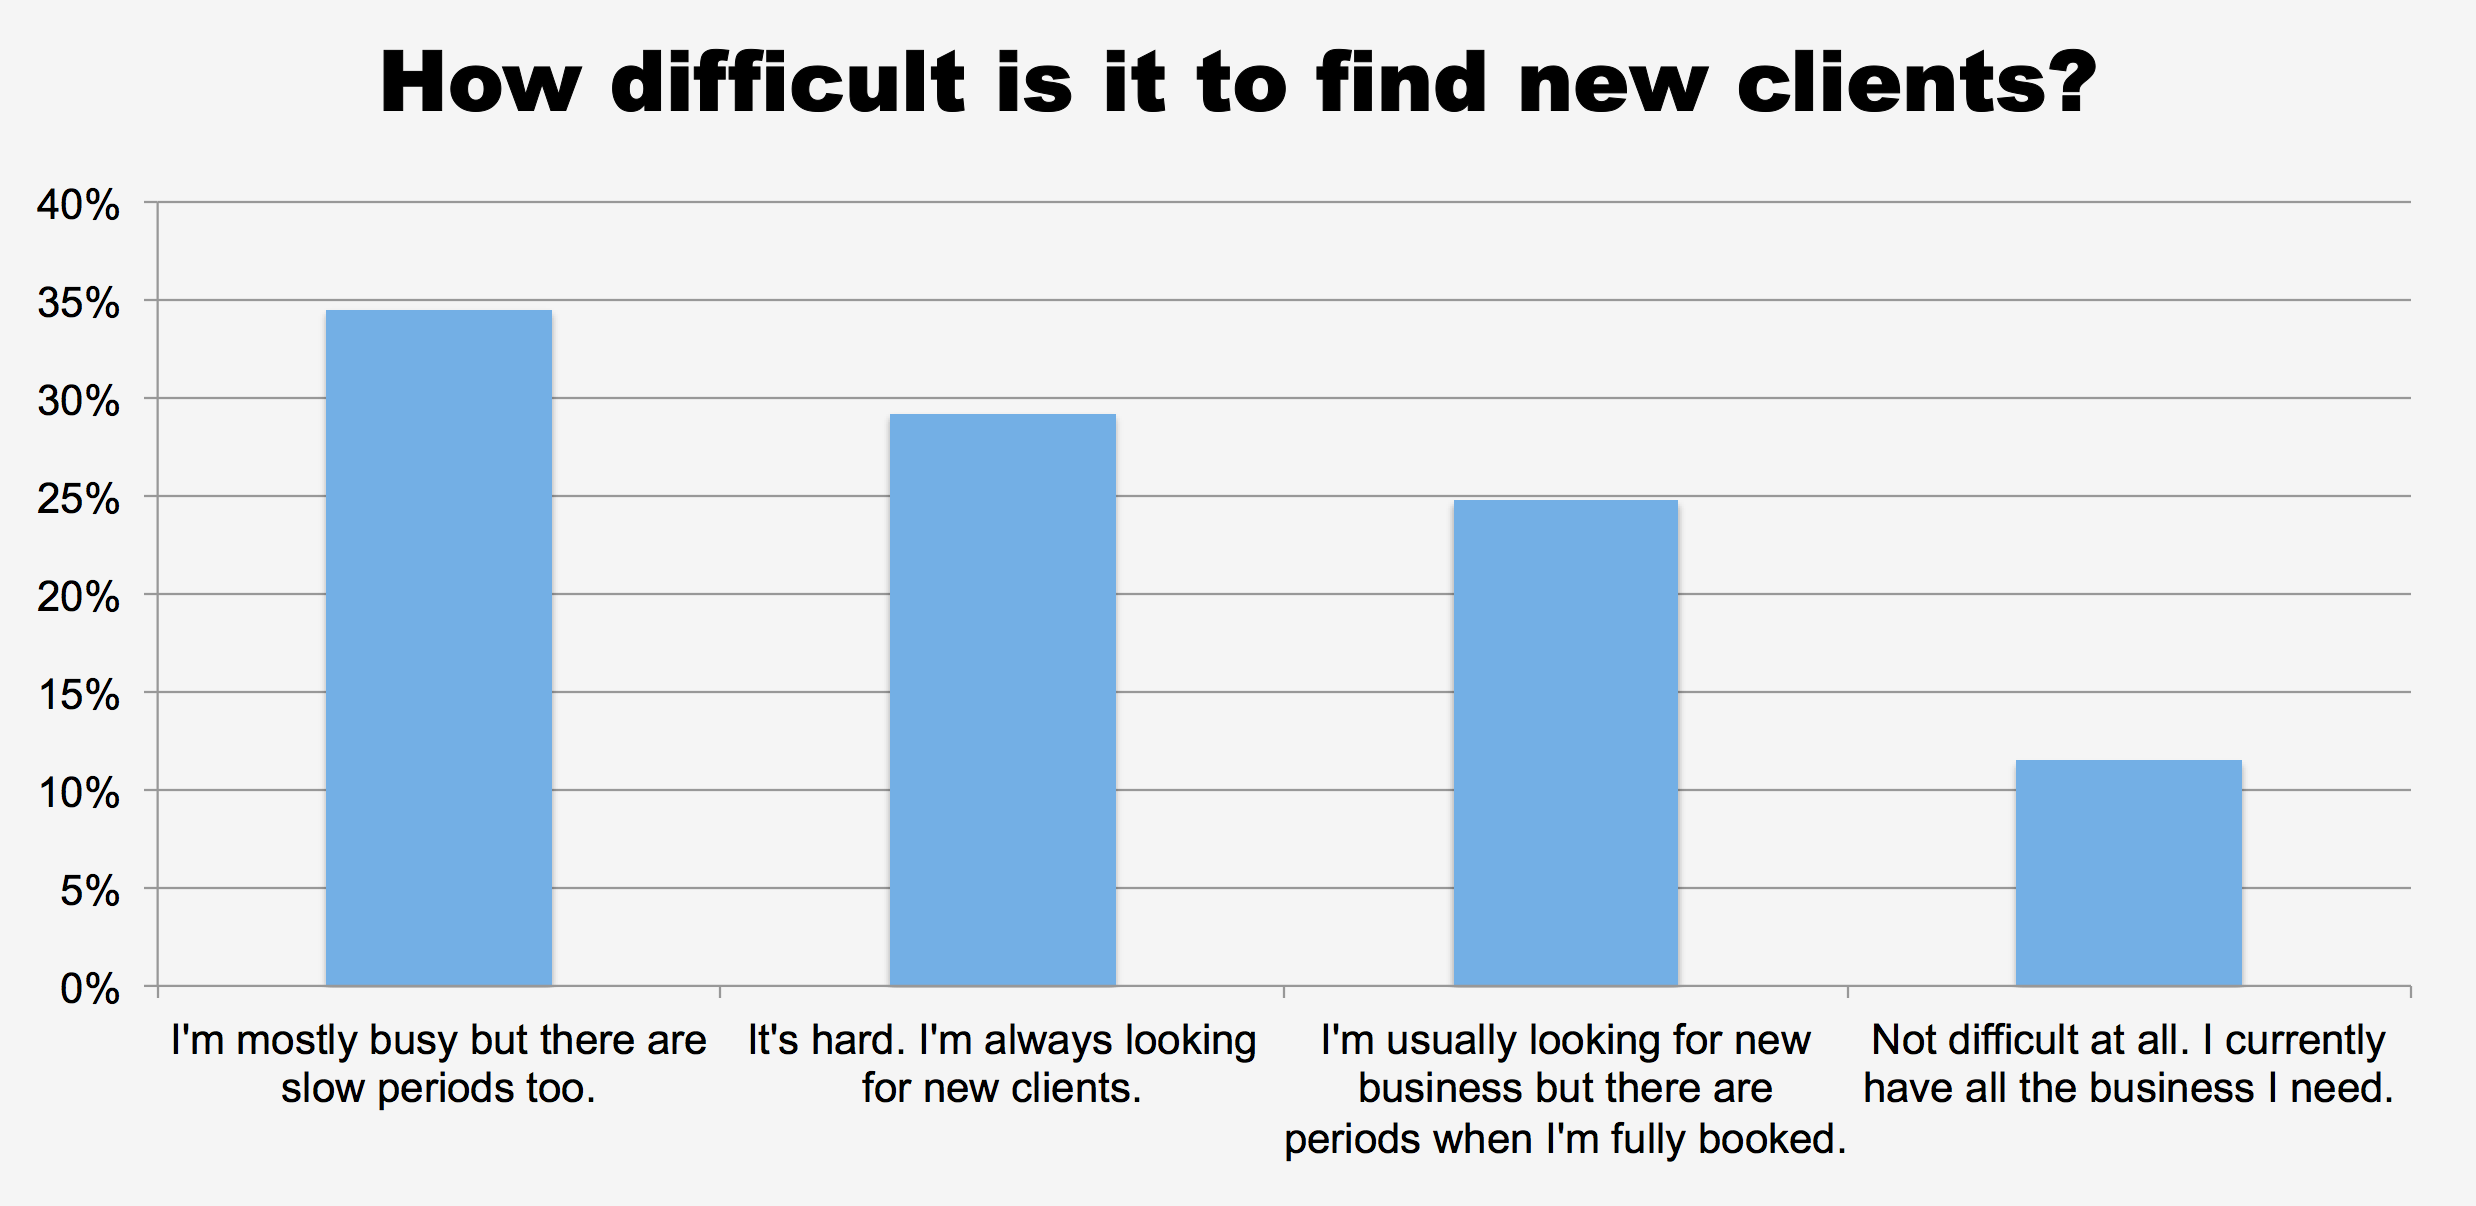 How difficult is it to find new clients?